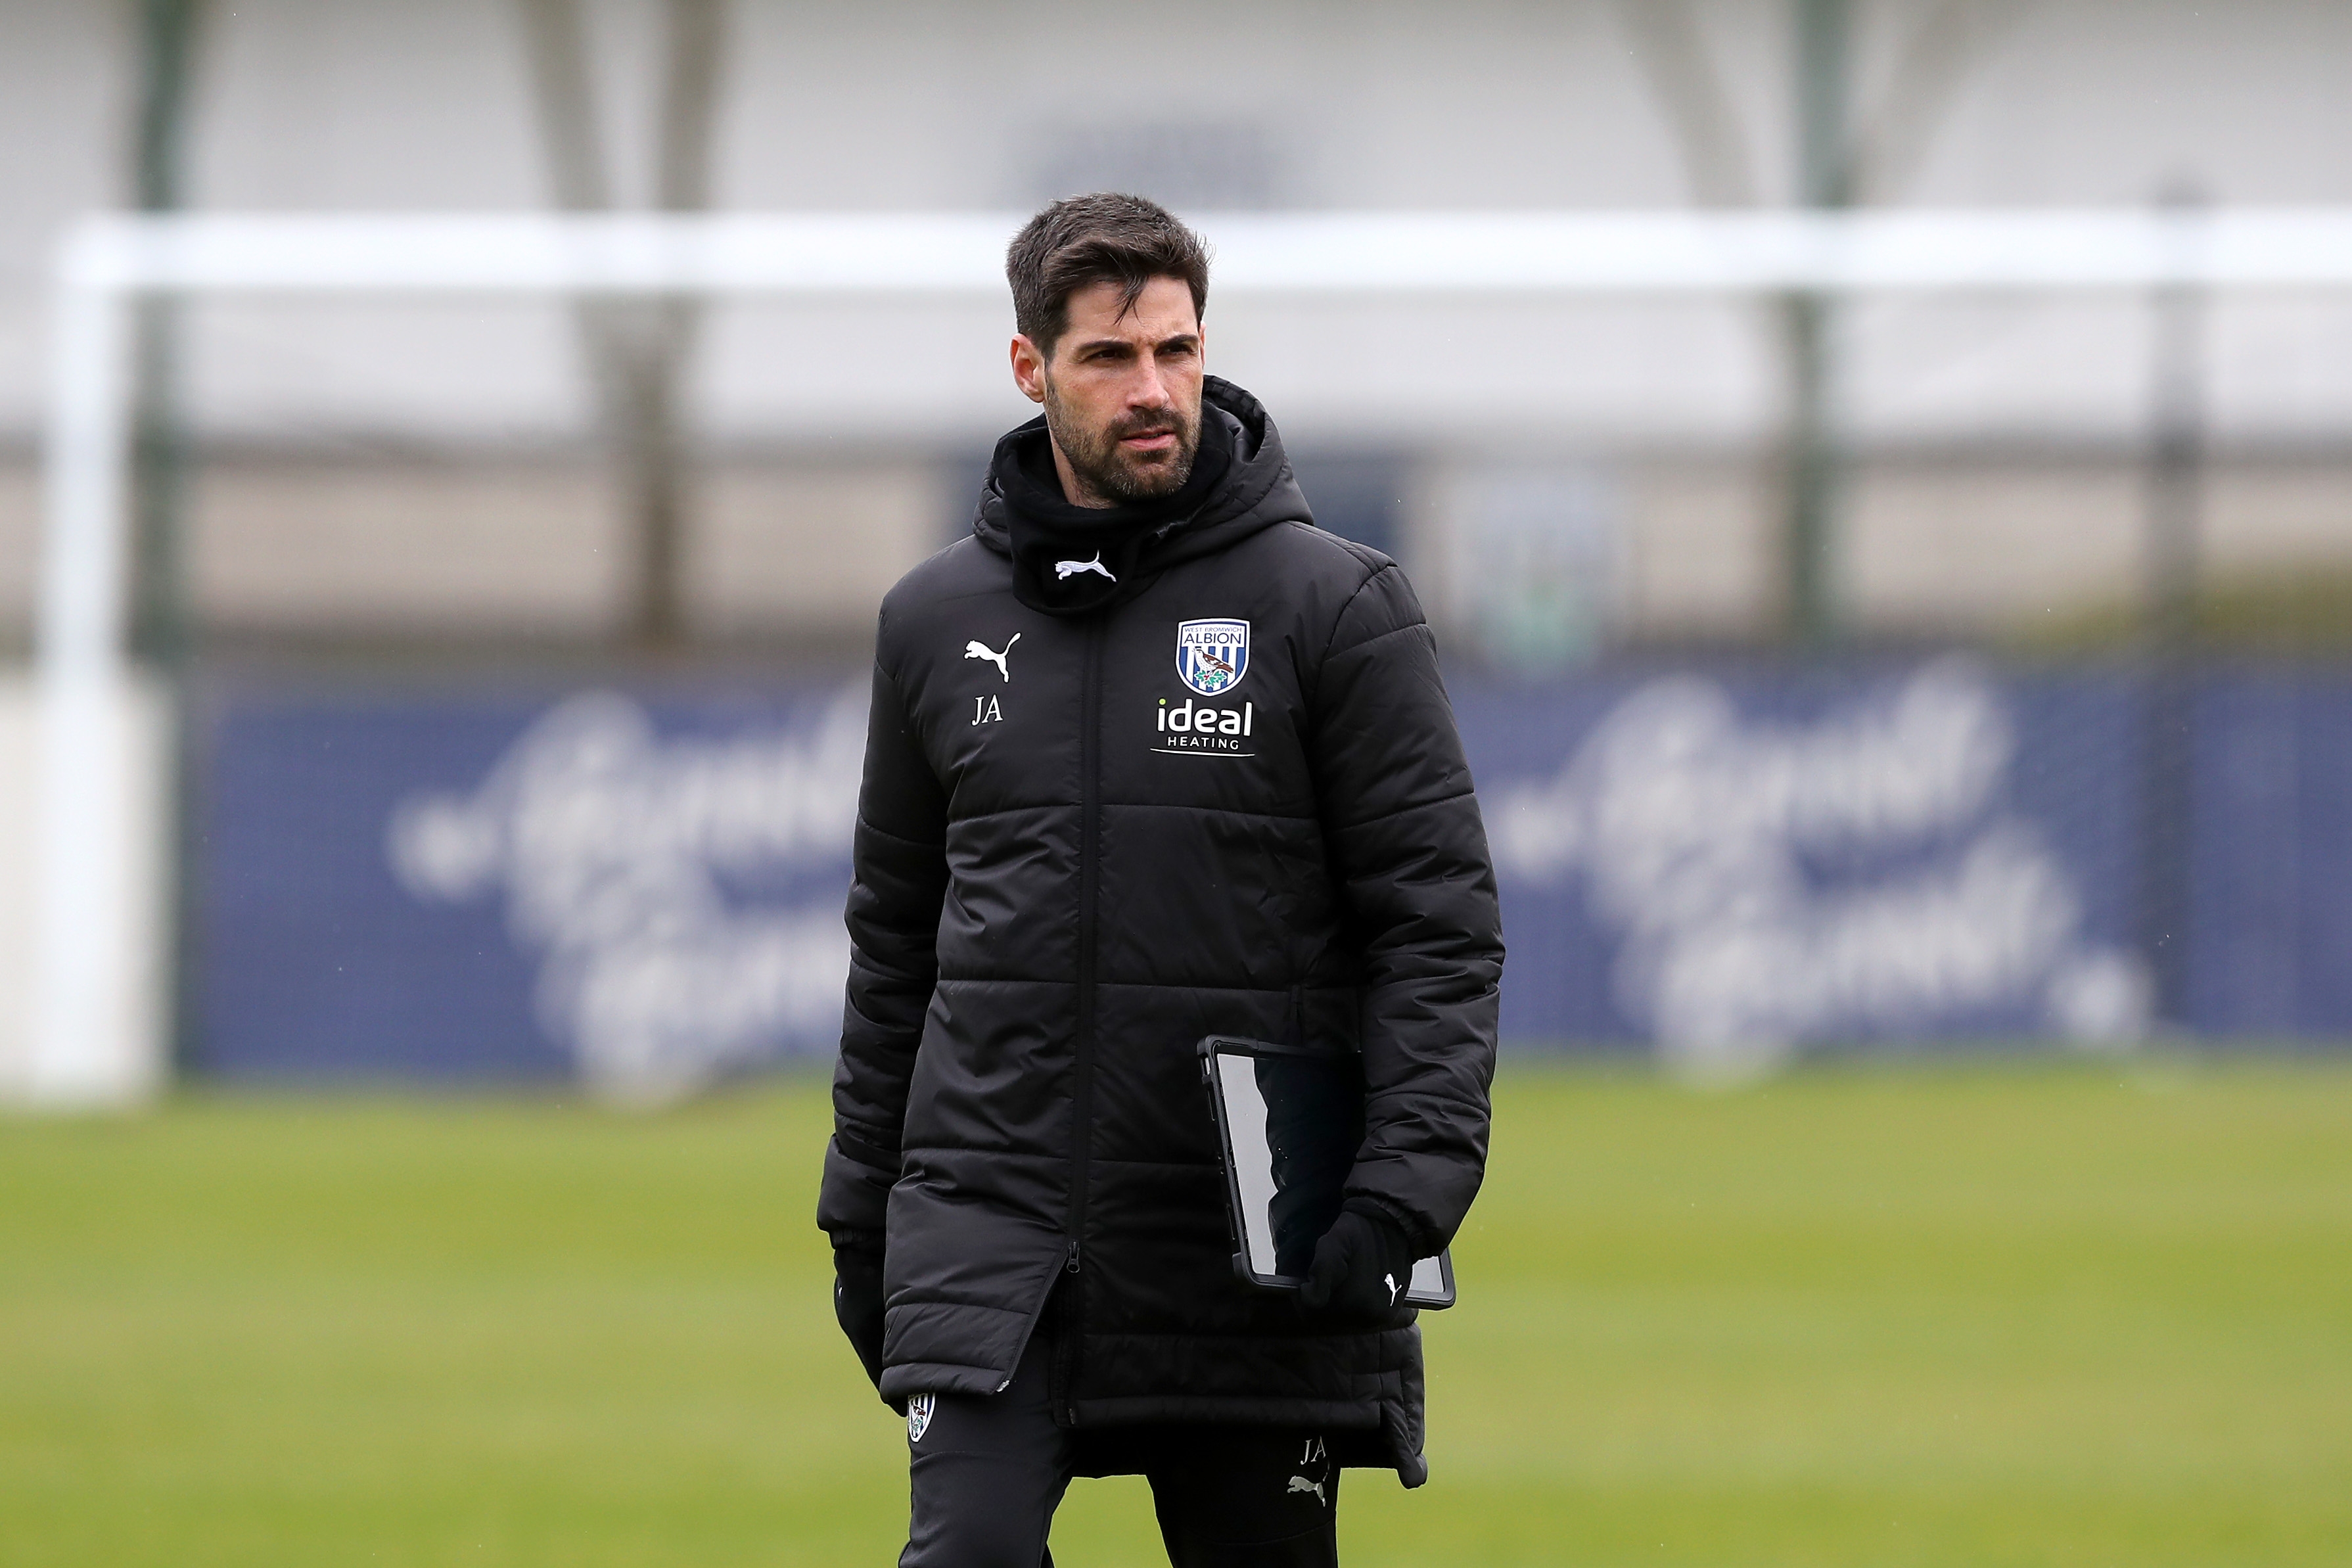 Jorge Alarcon wearing a black coat holding a notepad out on the training pitch